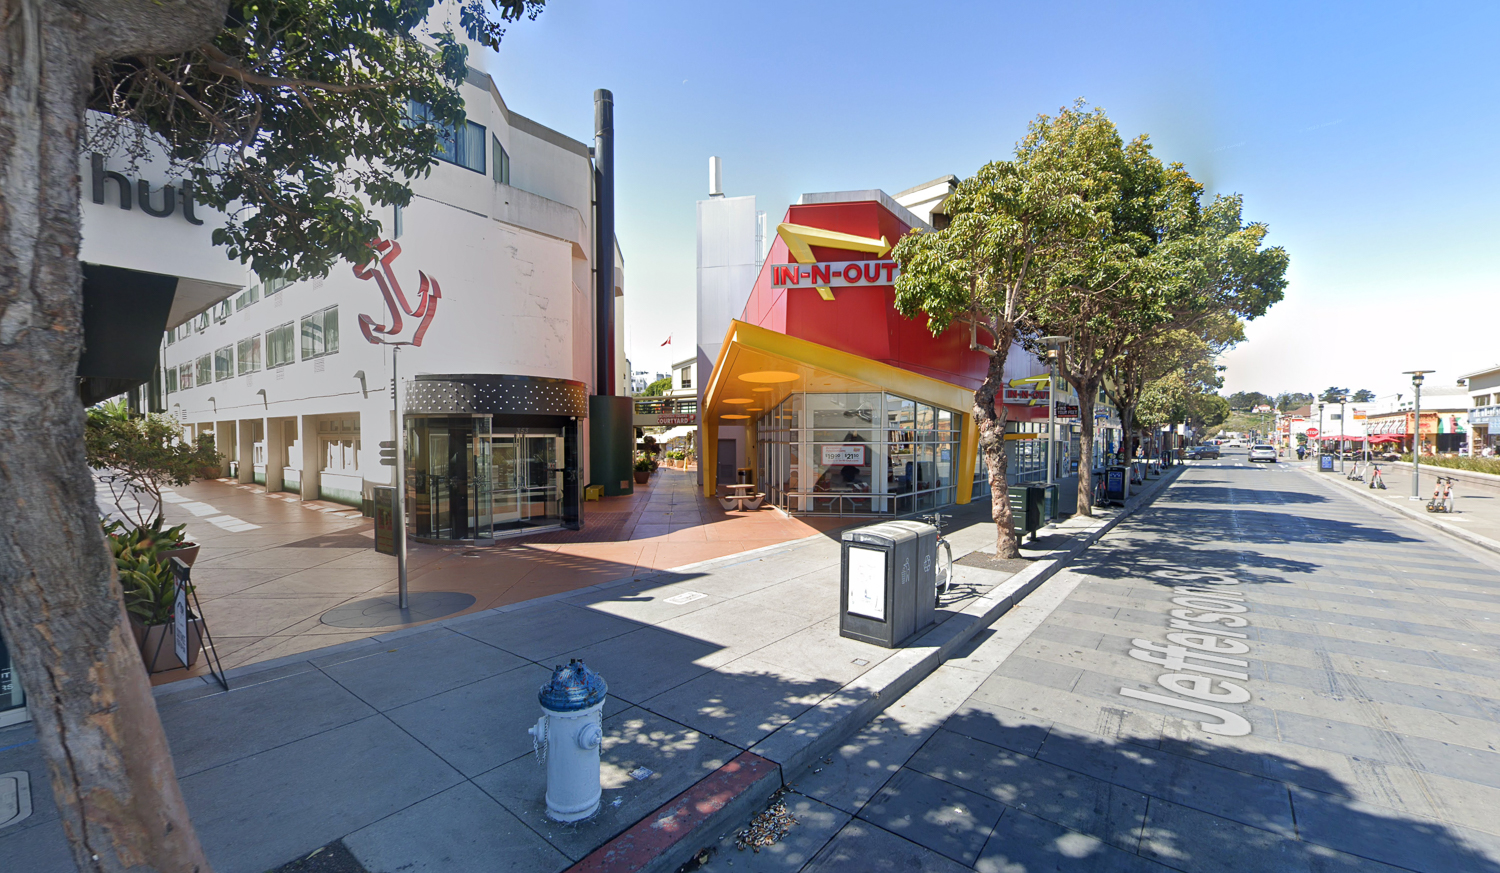 Anchorage Square In-N-Out Burger location, image by Google Street View